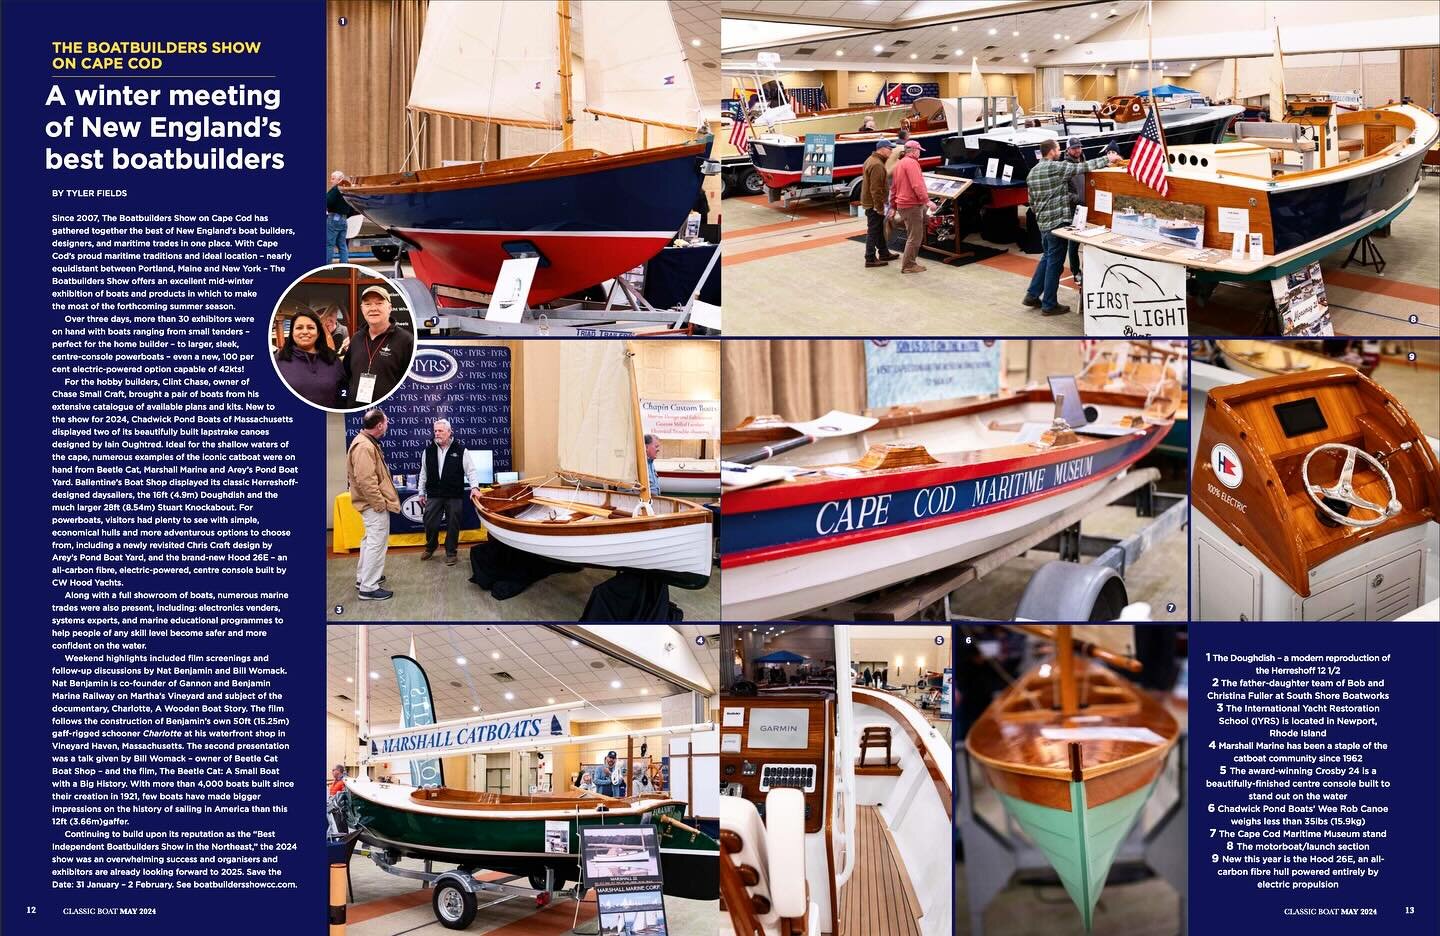 Pick up the May issue of @classicboatmagazine for a rundown on this year&rsquo;s @boatbuildersshowcapecod.

Already looking forward to the 2025 show!